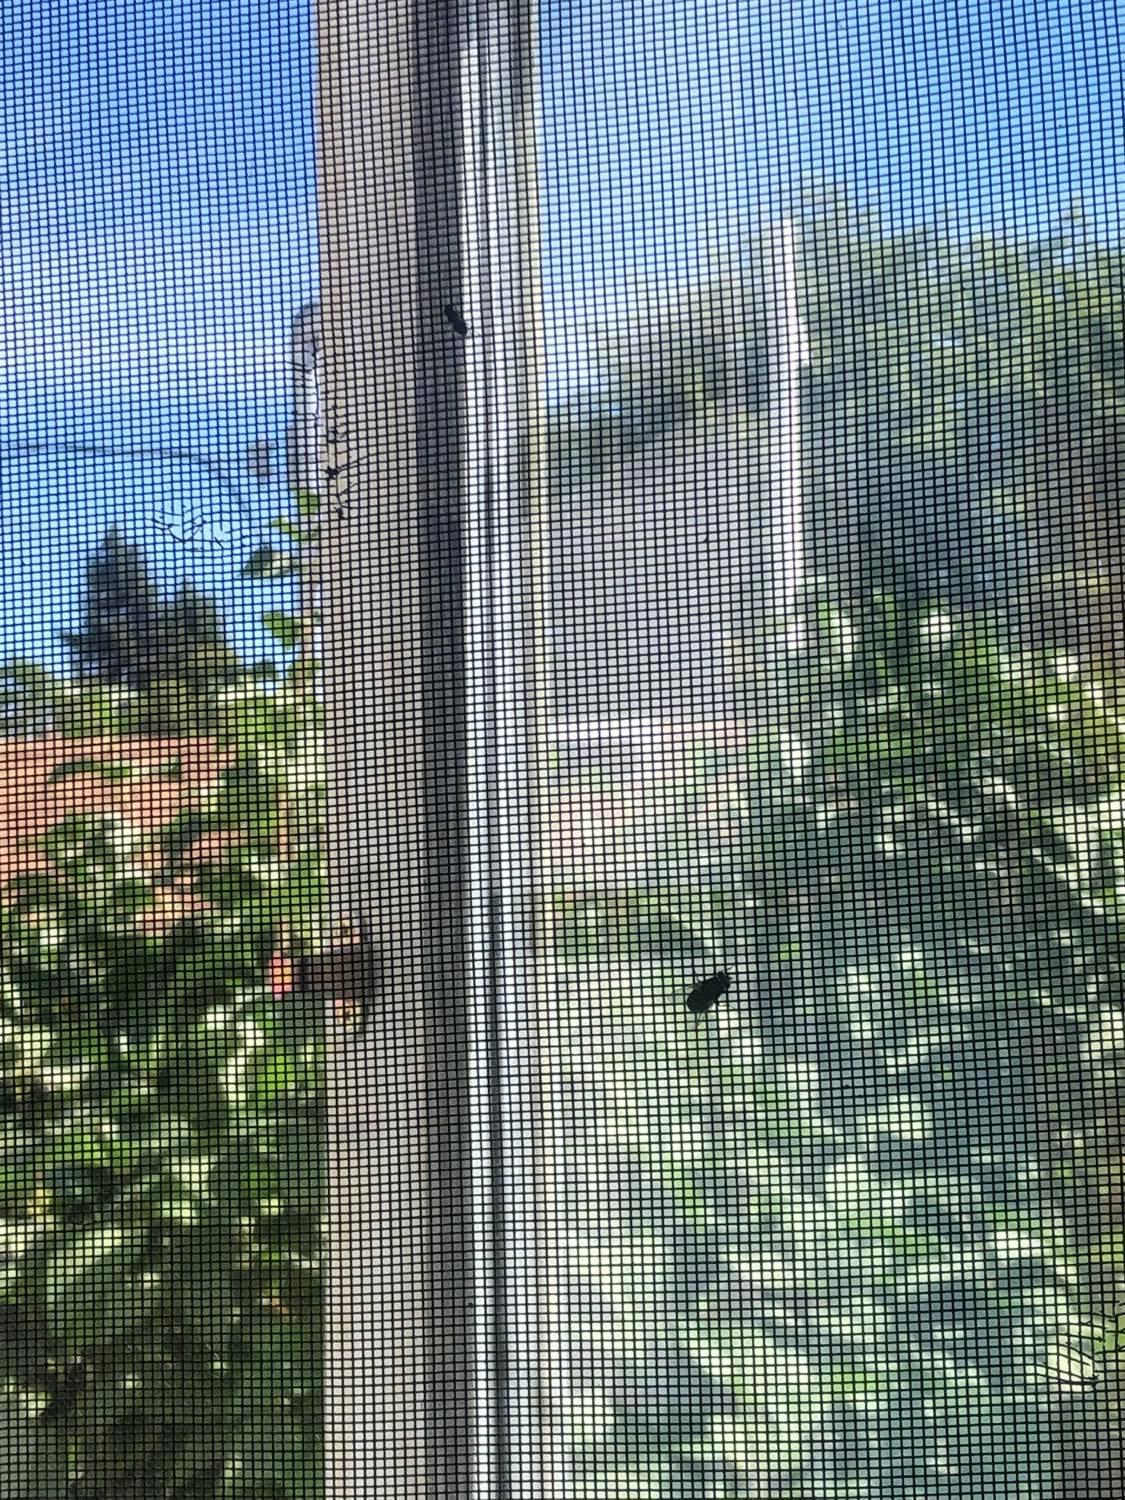 Two flies on the screen, waiting to see the big outdoors. One is the larger one from the last pic, and the other is a smaller one, both of which ventured into the great outdoors moments after this photo was taken.